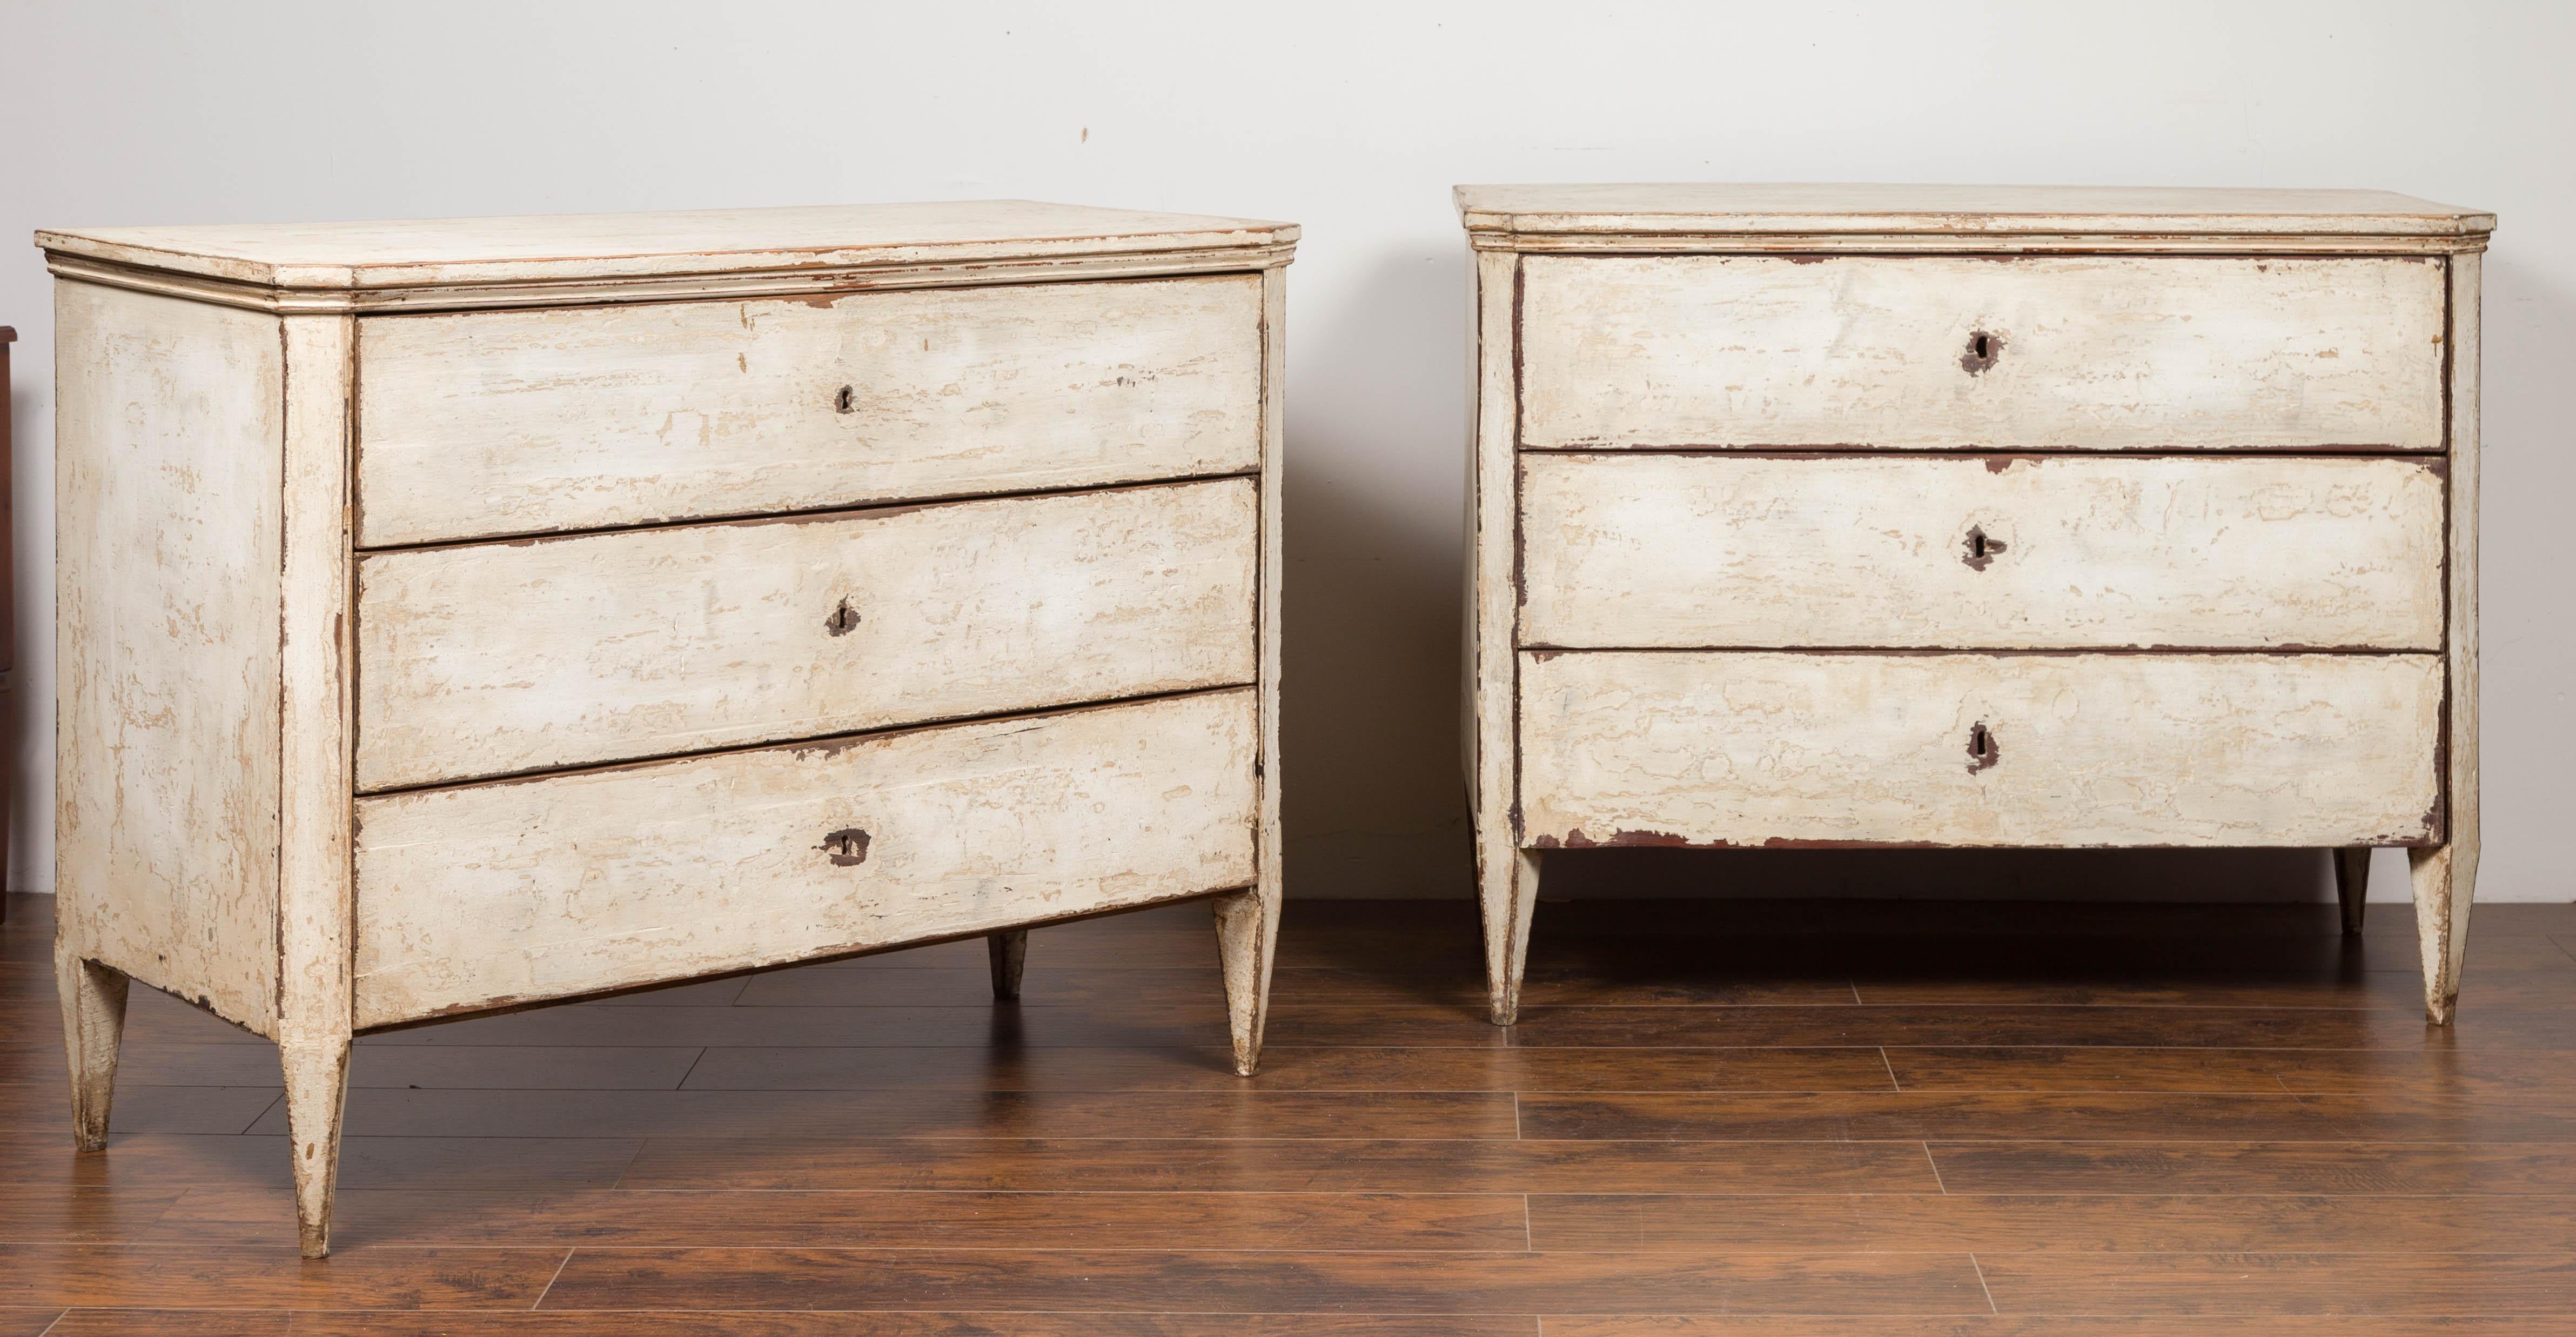 19th Century Pair of French Neoclassical Style Painted Three-Drawer Commodes, circa 1860